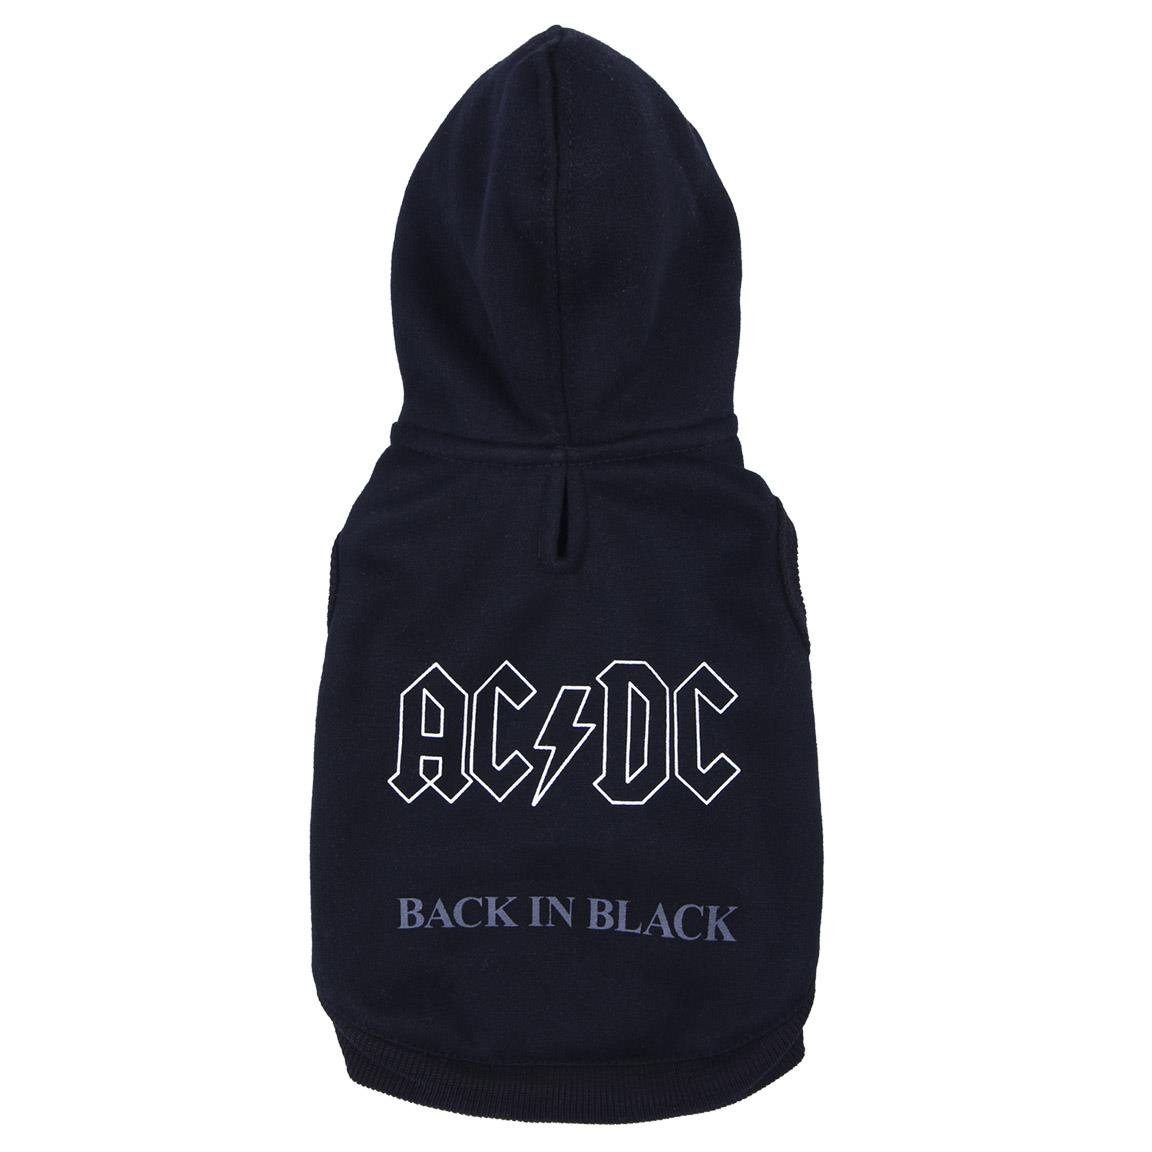 Sudadera Para Perros xs cotton brushed acdc fan pets licencia oficial cerdá lifes little moments forfanpets ropa rock de disney 200 g